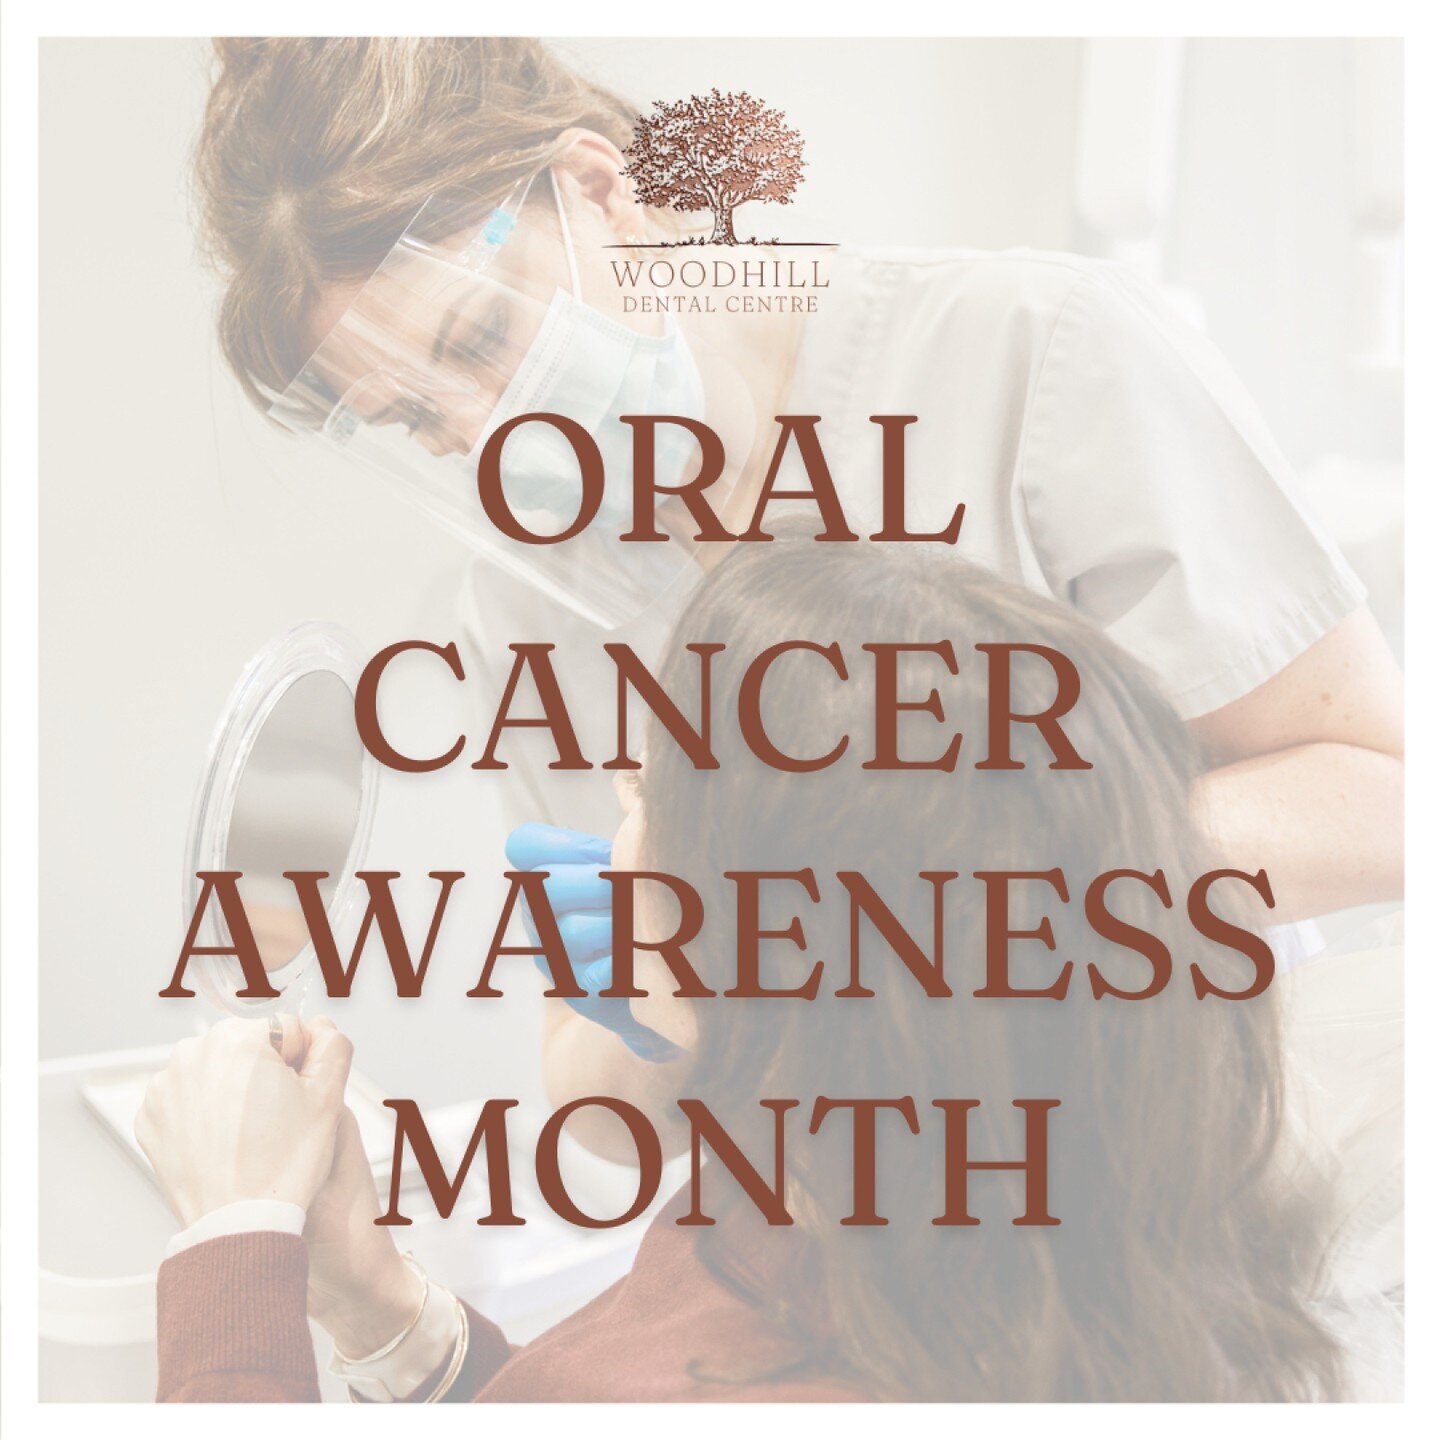 April is Oral Cancer Awareness Month 📆

Did you know that oral cancer is more common than you may think? Let's raise awareness and spread knowledge about this cruel disease together!

🌟 Oral cancer can affect anyone, regardless of age or lifestyle.